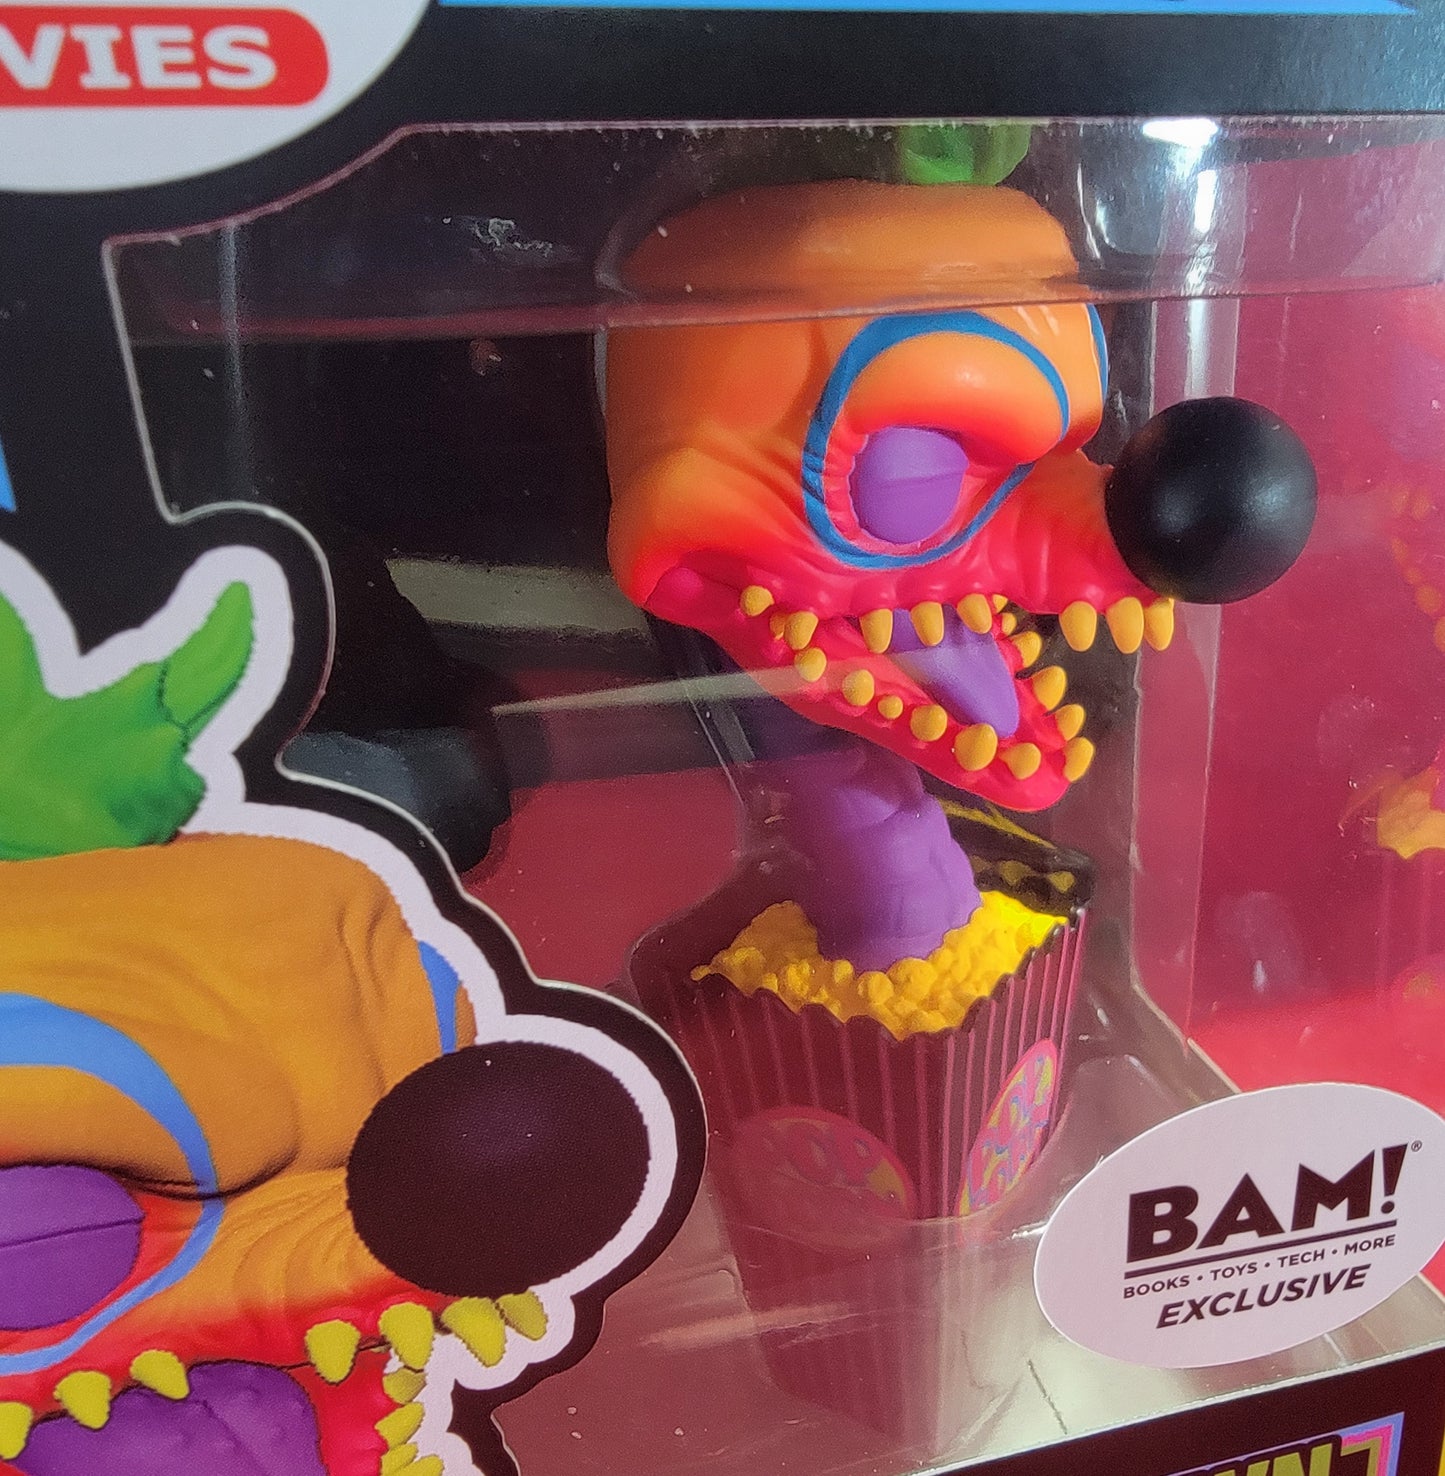 Baby klown bam exclusive funko # 1422 (nib)
With pop protector